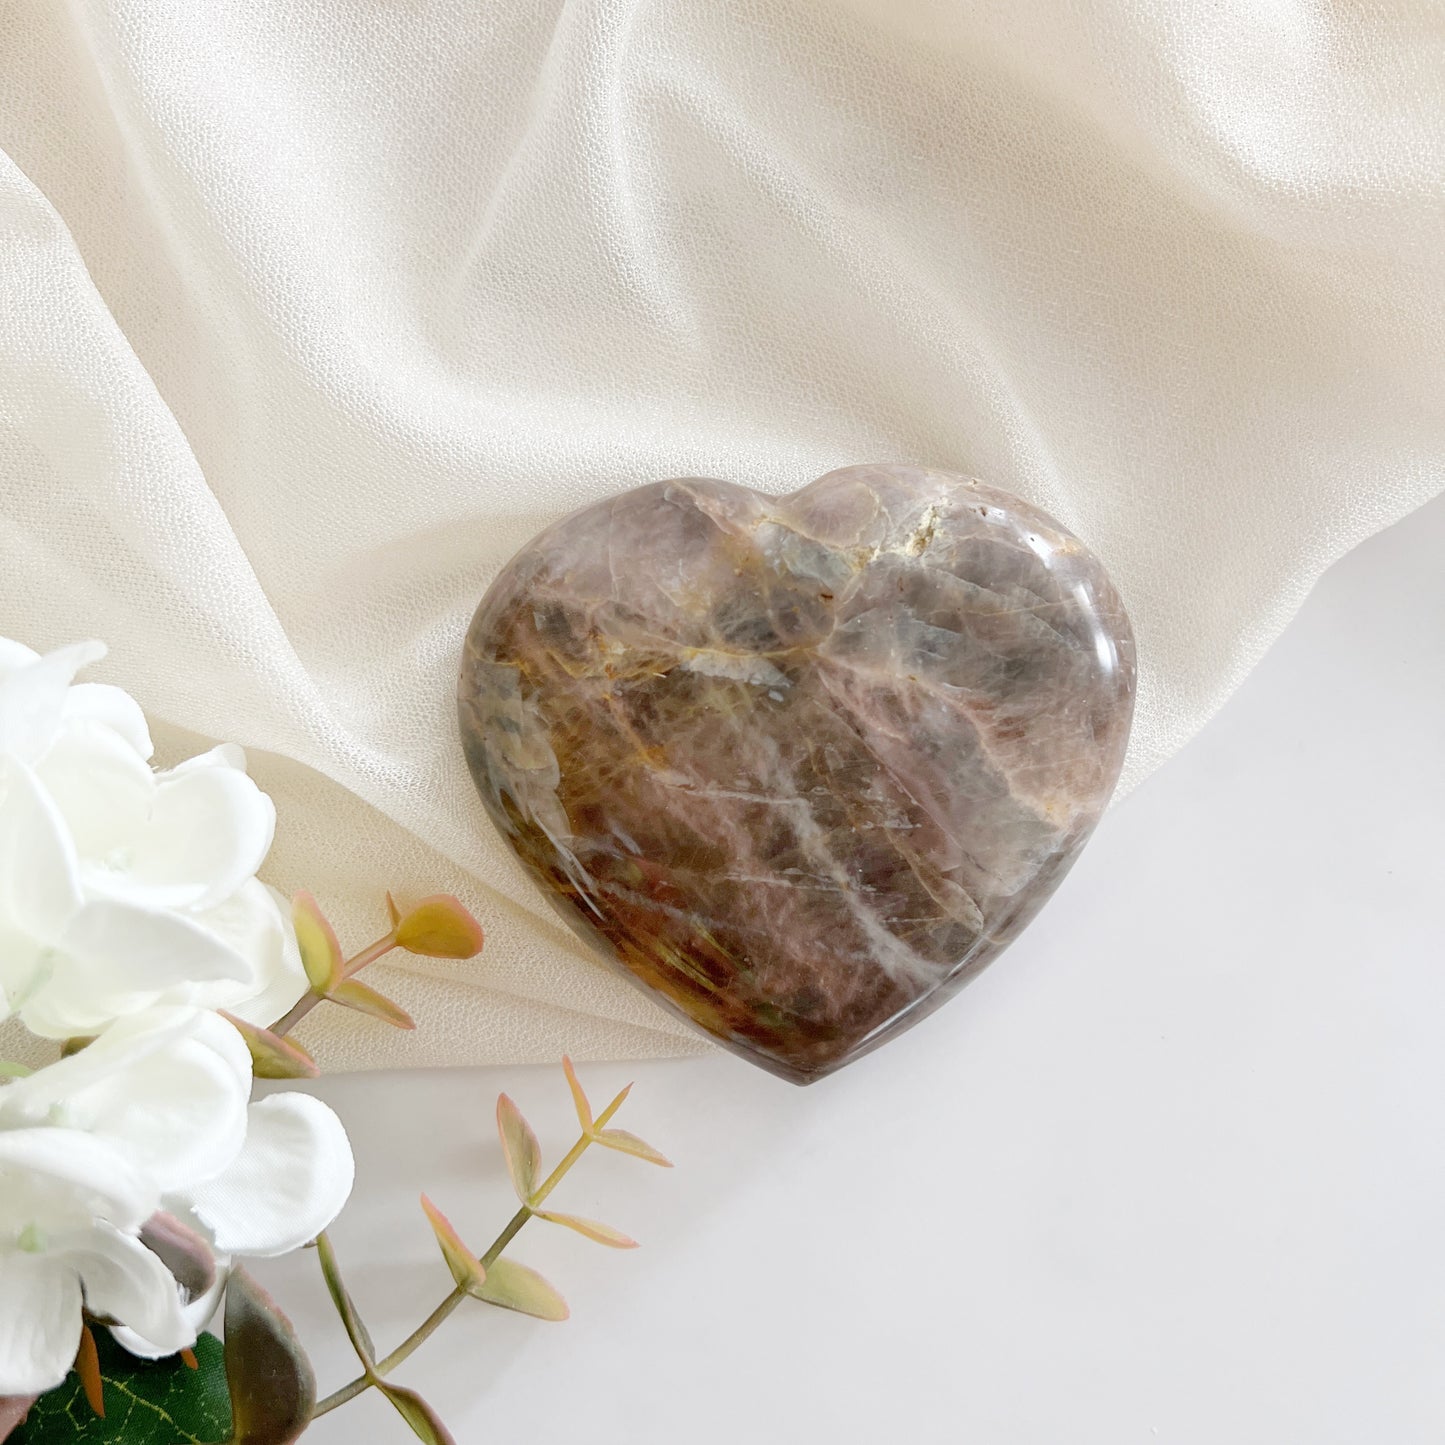 Black moonstone heart for enhancing intuition, psychic abilities, and emotional balance.